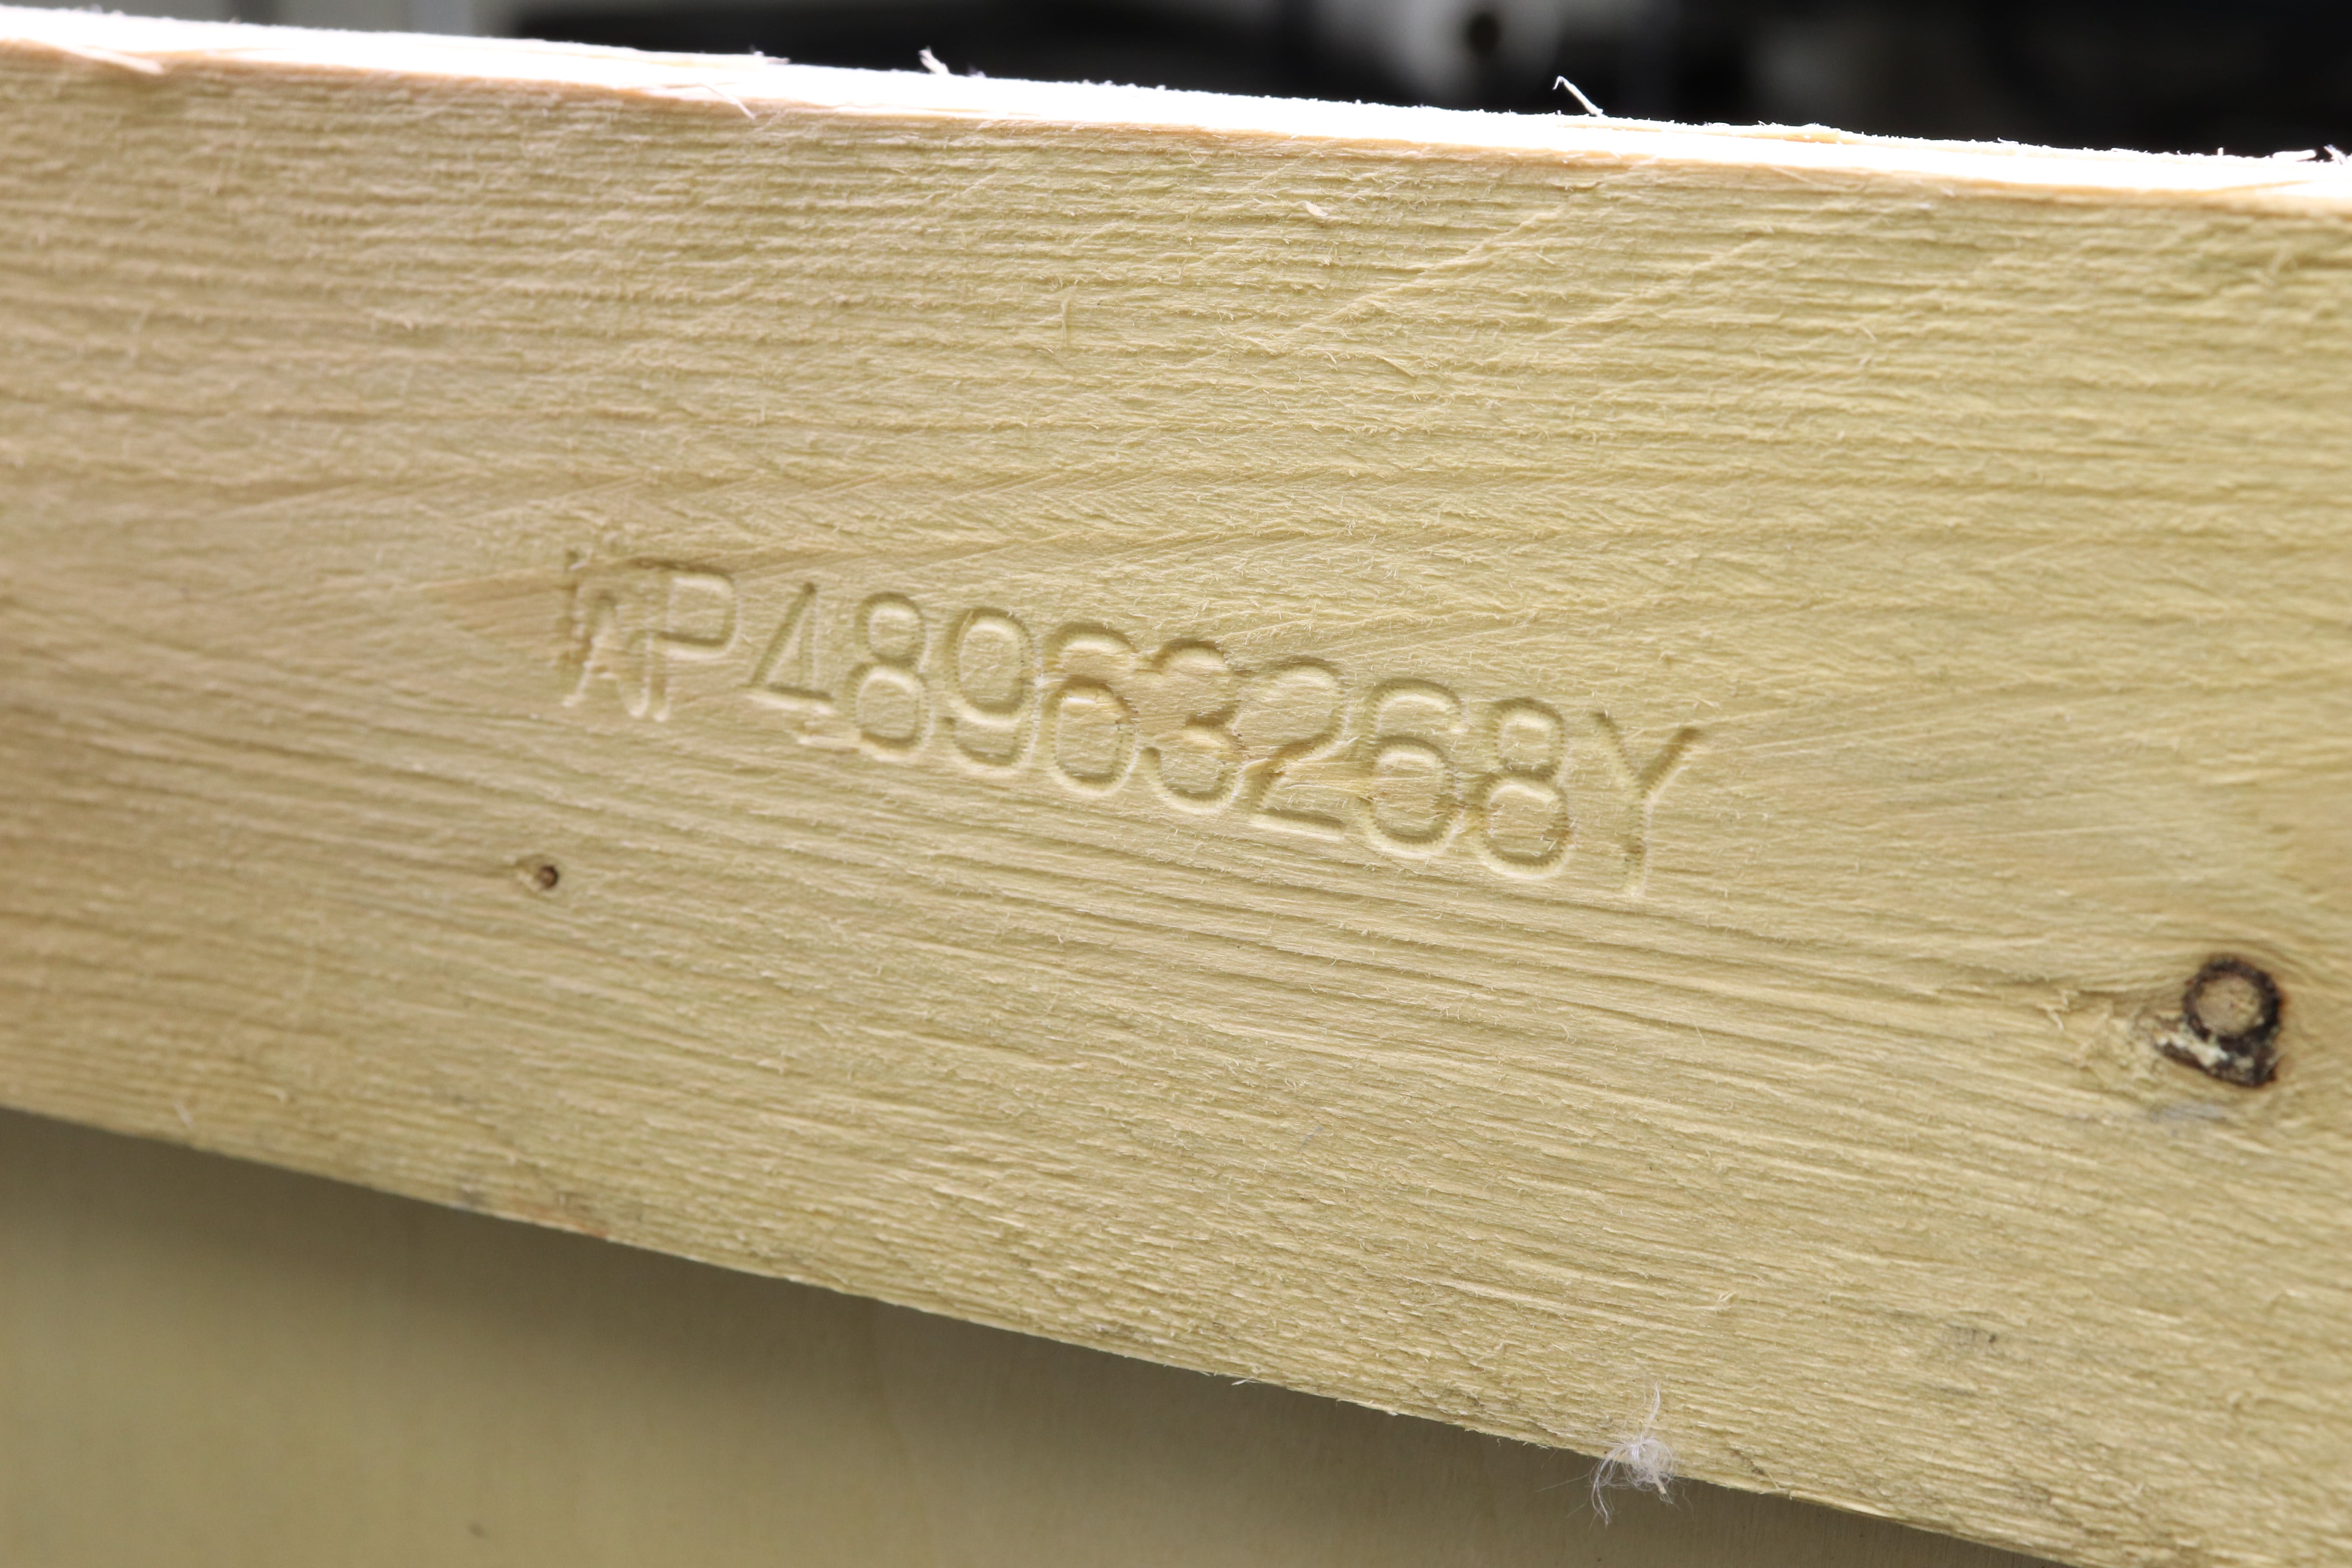 Image of wood engraved with text and numbers 'WP48963268Y'.